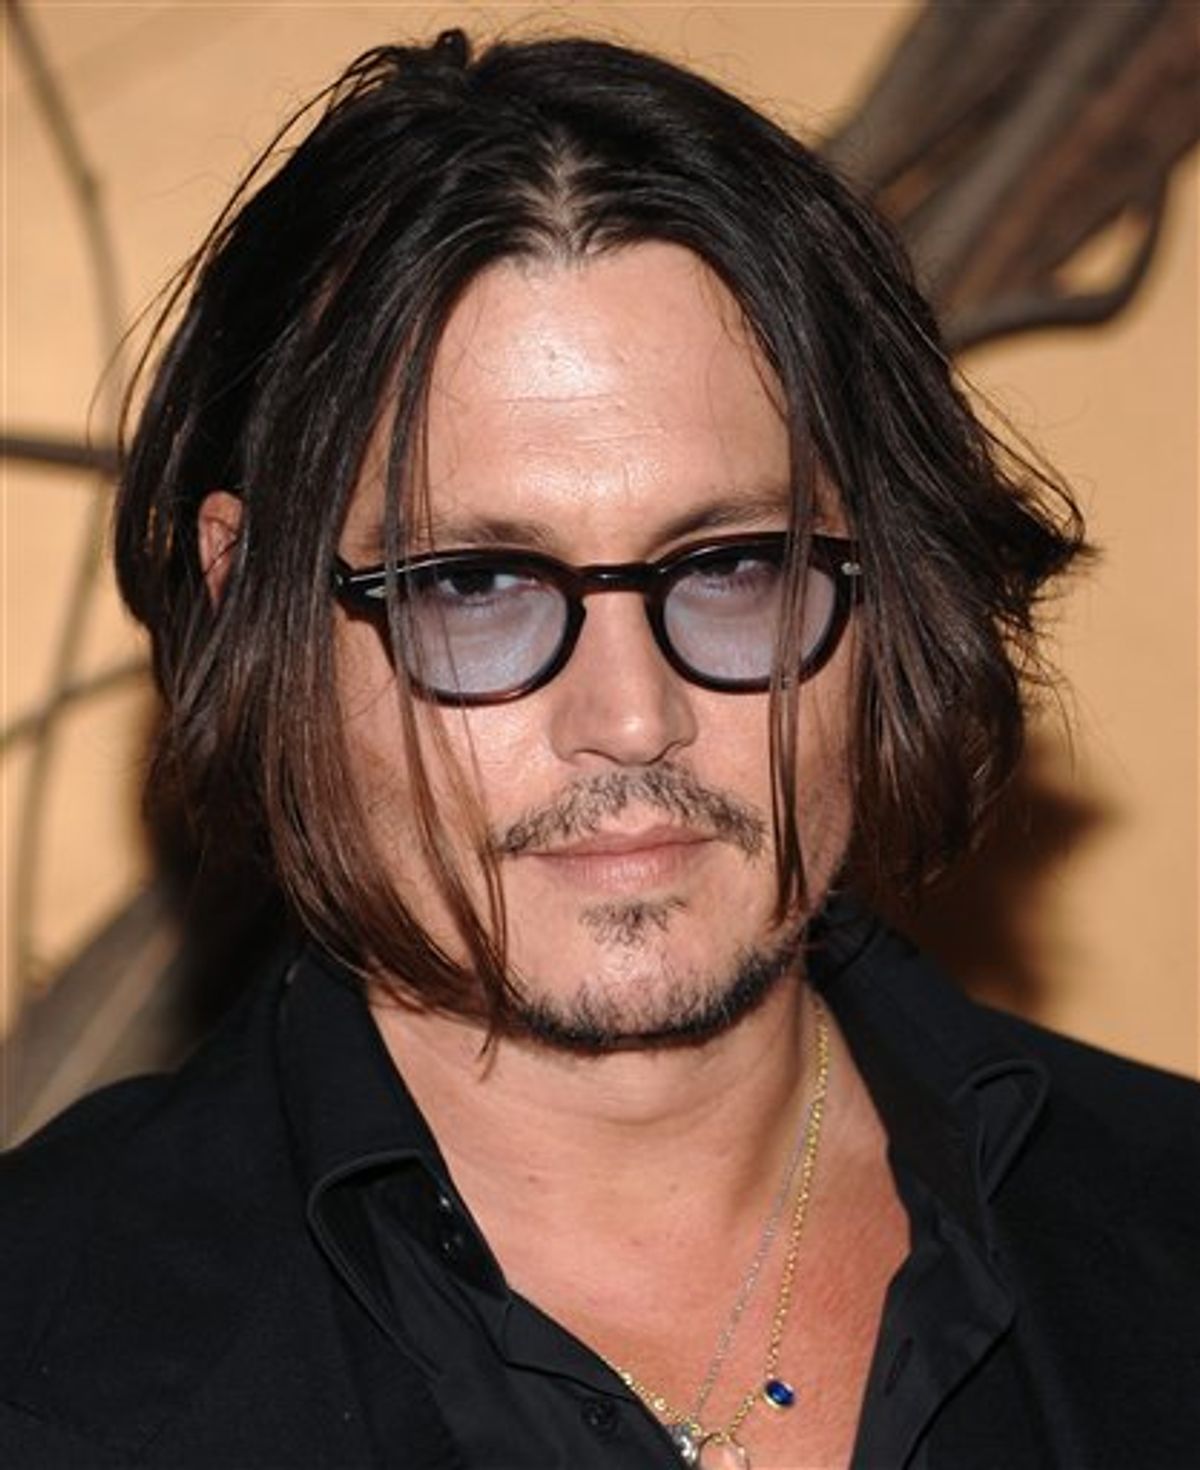 FILE - In this Nov. 17, 2009 file photo, actor Johnny Depp attends The Museum of Modern Art's film benefit tribute to Tim Burton in New York. Depp was named People magazine's "Sexiest Man Alive" on Wednesday, Nov. 18, 2009. (AP Photo/Evan Agostini, File) (AP)